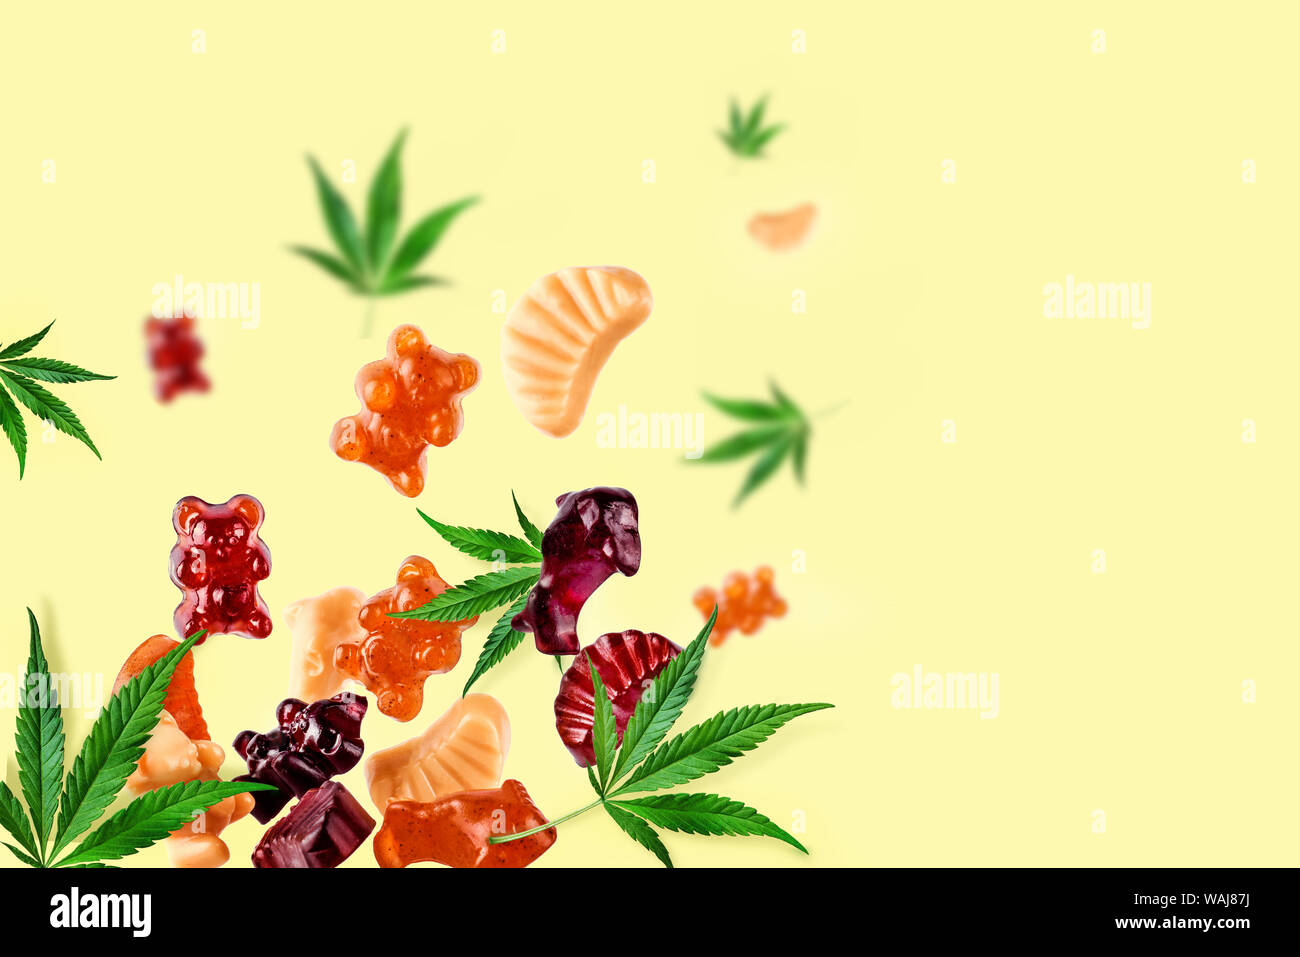 Chewing candies, marmalade with CBD oil and THC. Colored marmalades fly along with cannabis leaves. Colorful creative background, minimalism. Stock Photo